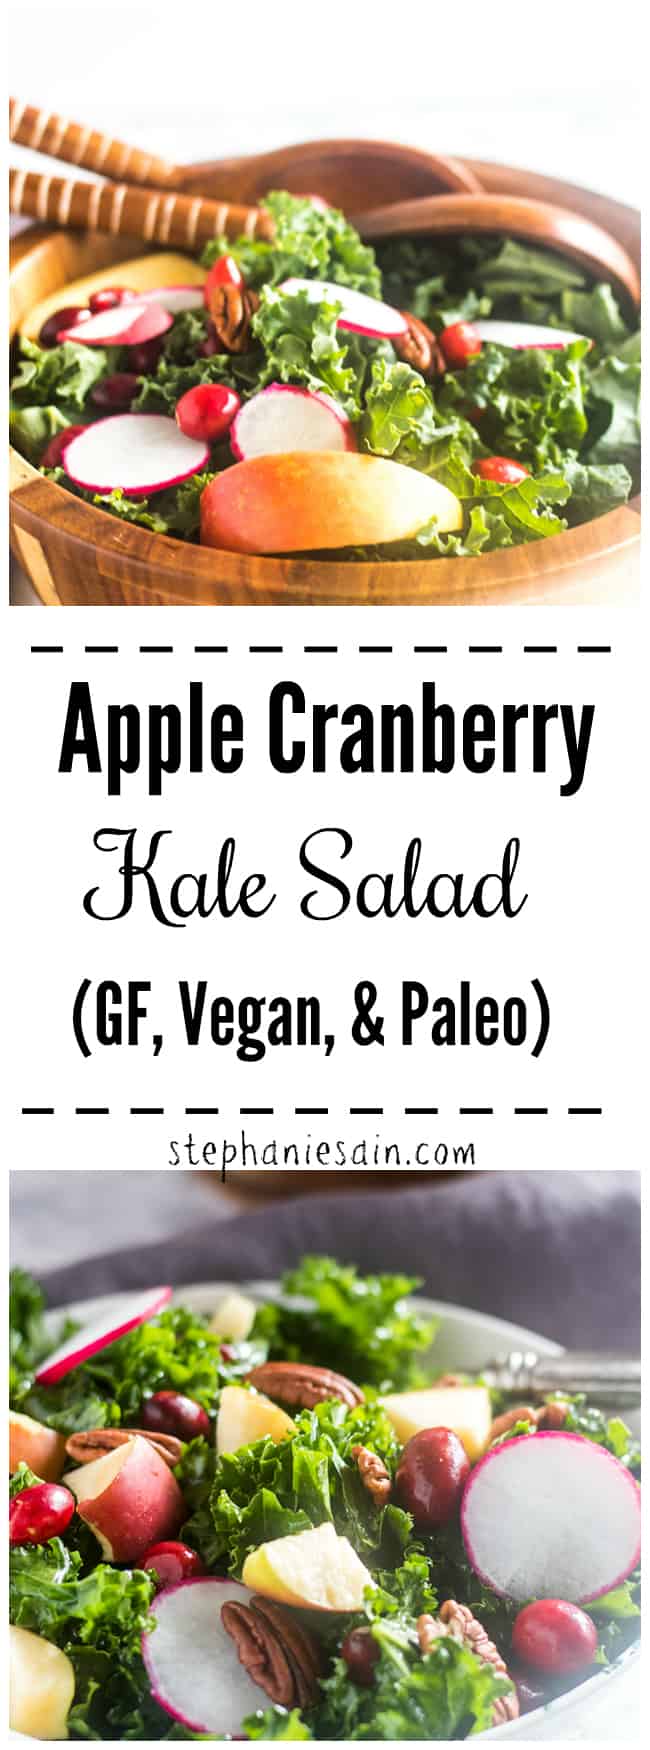 This Kale Salad is a super easy salad made with massaged kale, apples, cranberries & pecans. Lightly dressed with a lemon maple dressing. Perfect for a Holiday side or anytime you want a healthy light lunch or dinner. Gluten Free, Vegan, & Paleo.